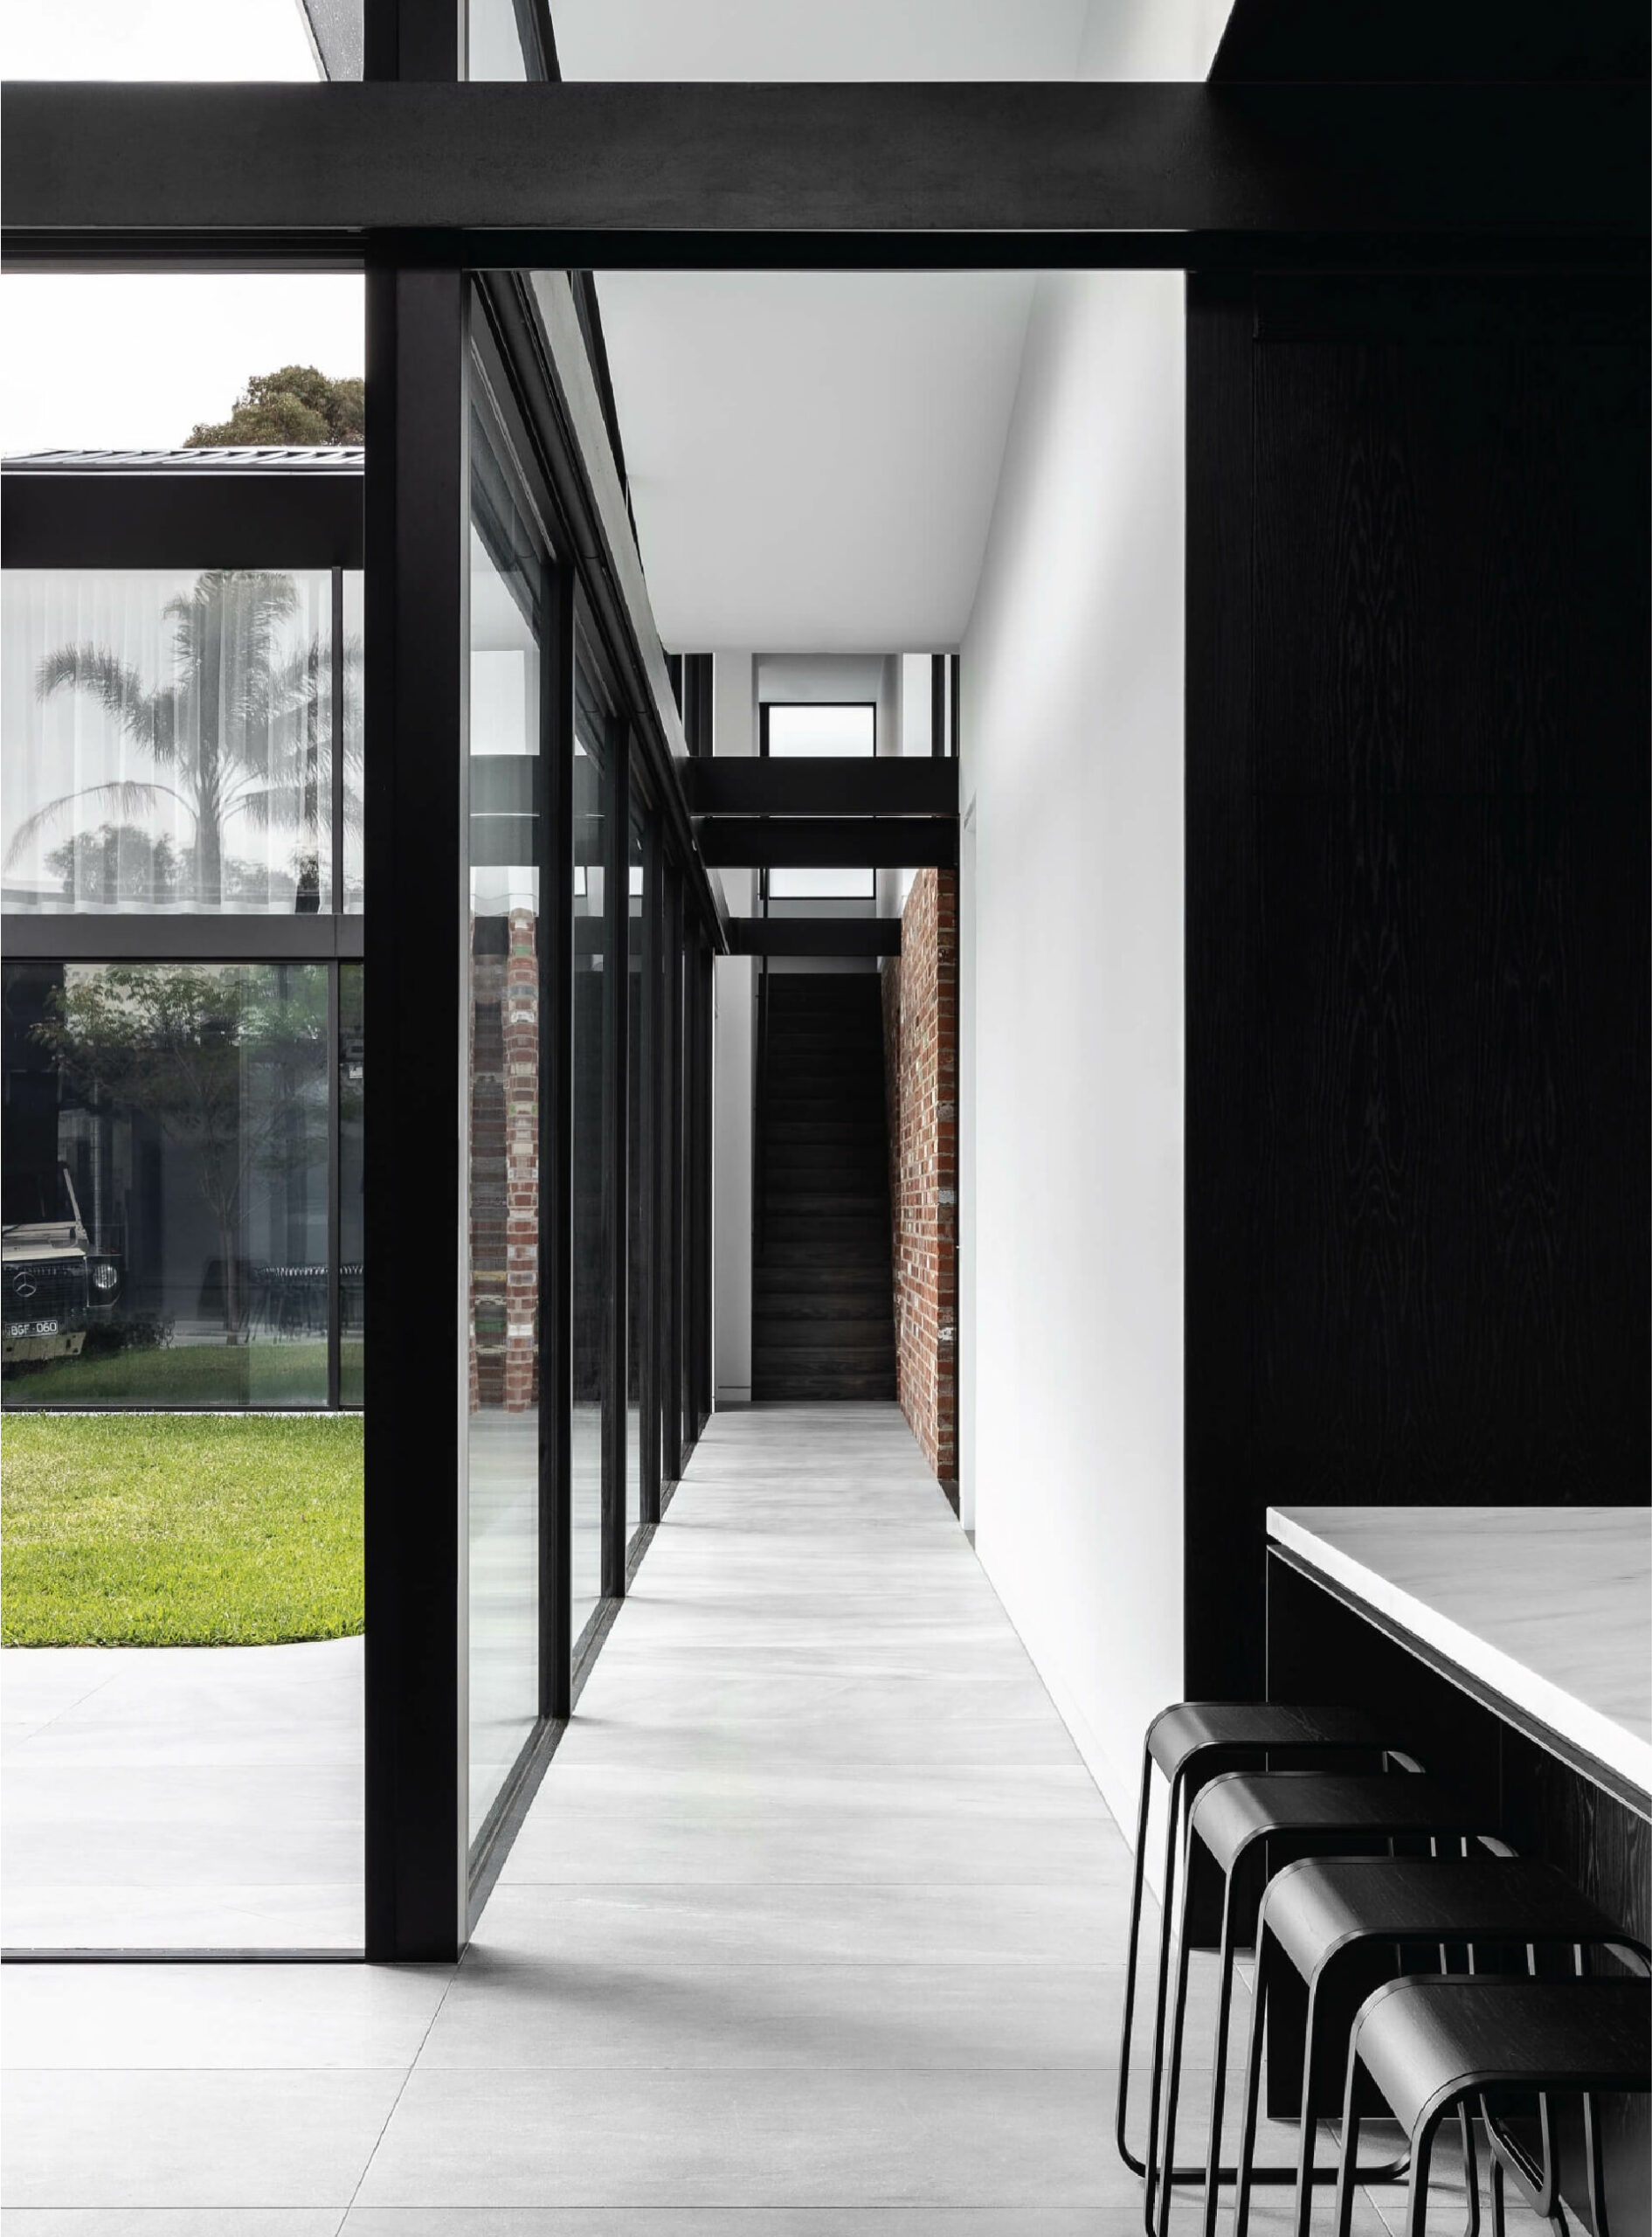 Prime Building Surveyors St Kilda Residence interior of dining area looking out onto exterior entertaining area 